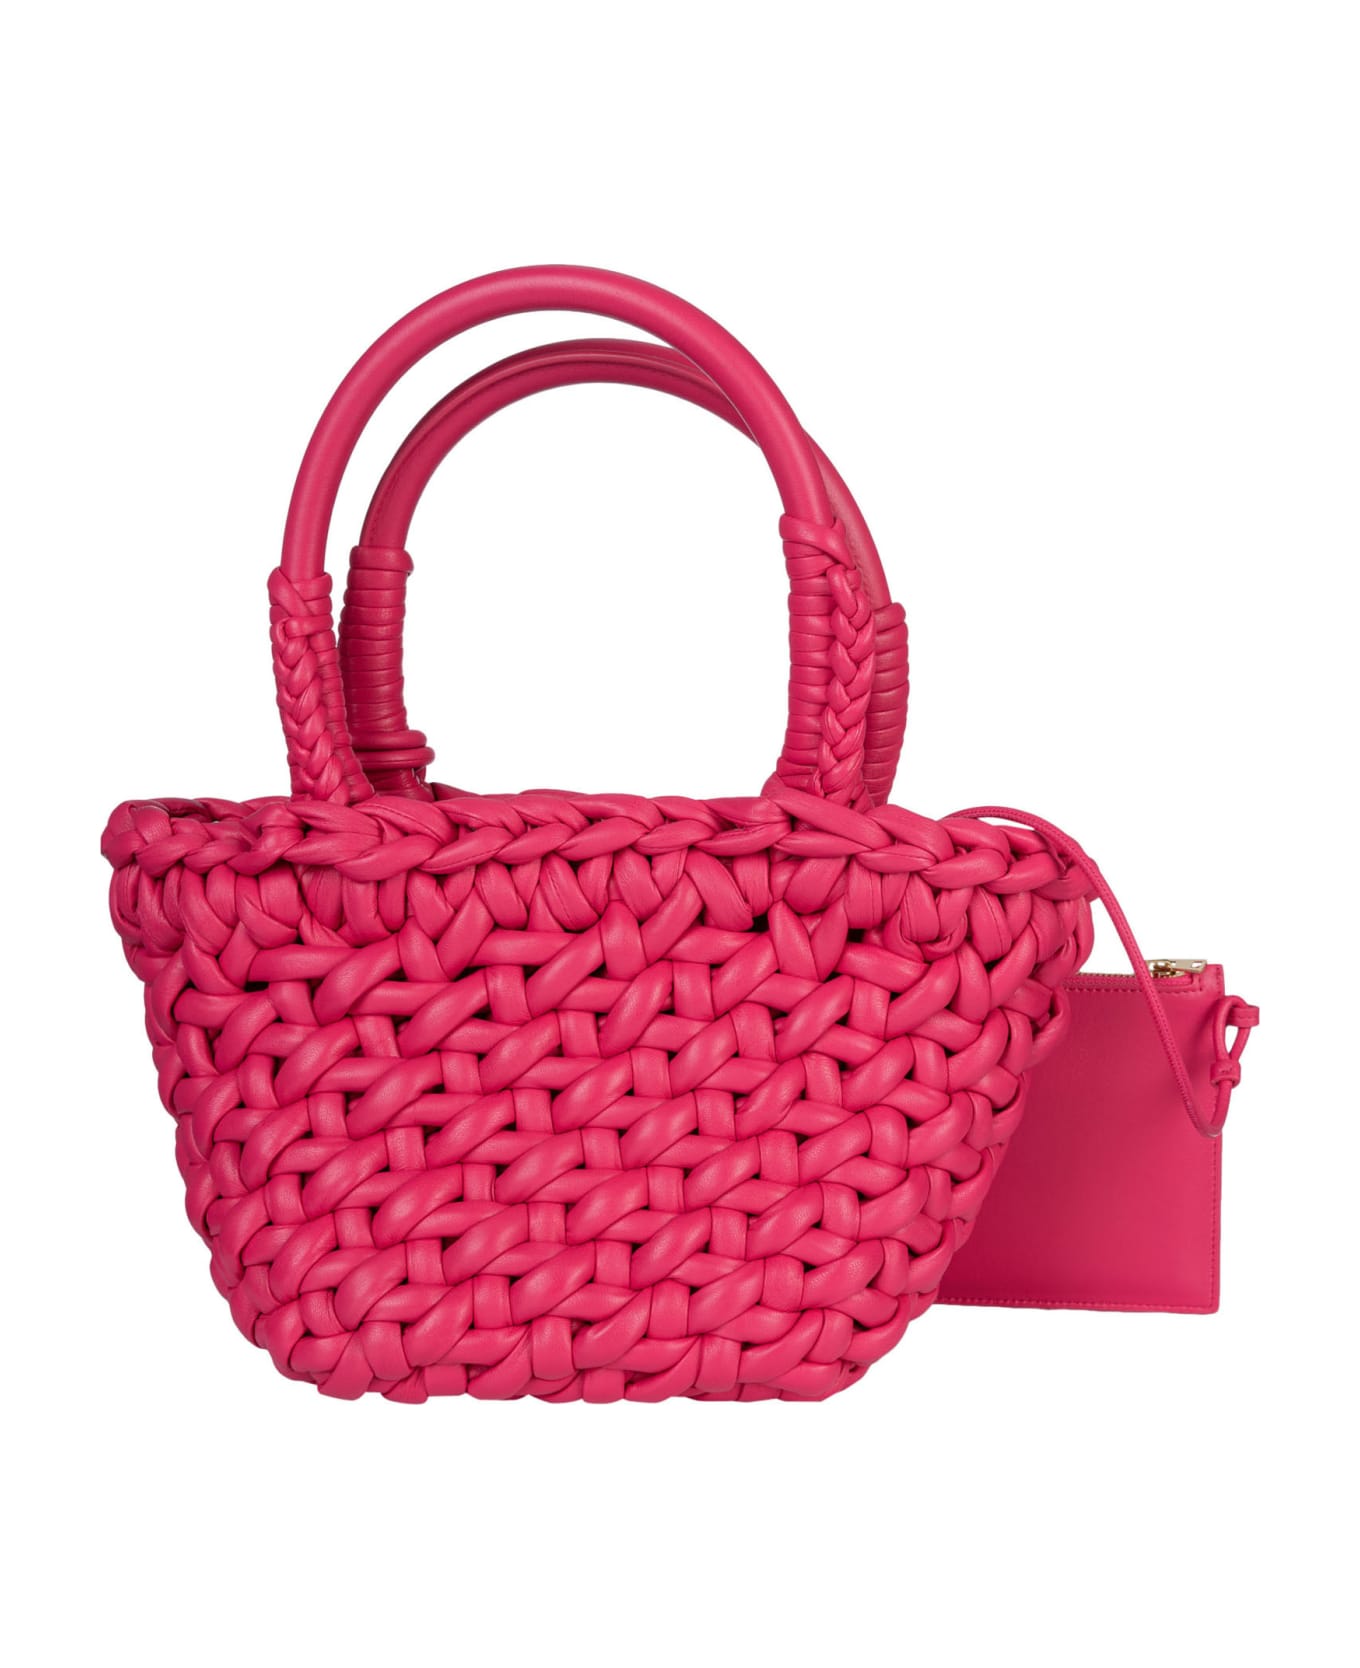 Alanui Weave Clutch Detail Tote - Pink トートバッグ